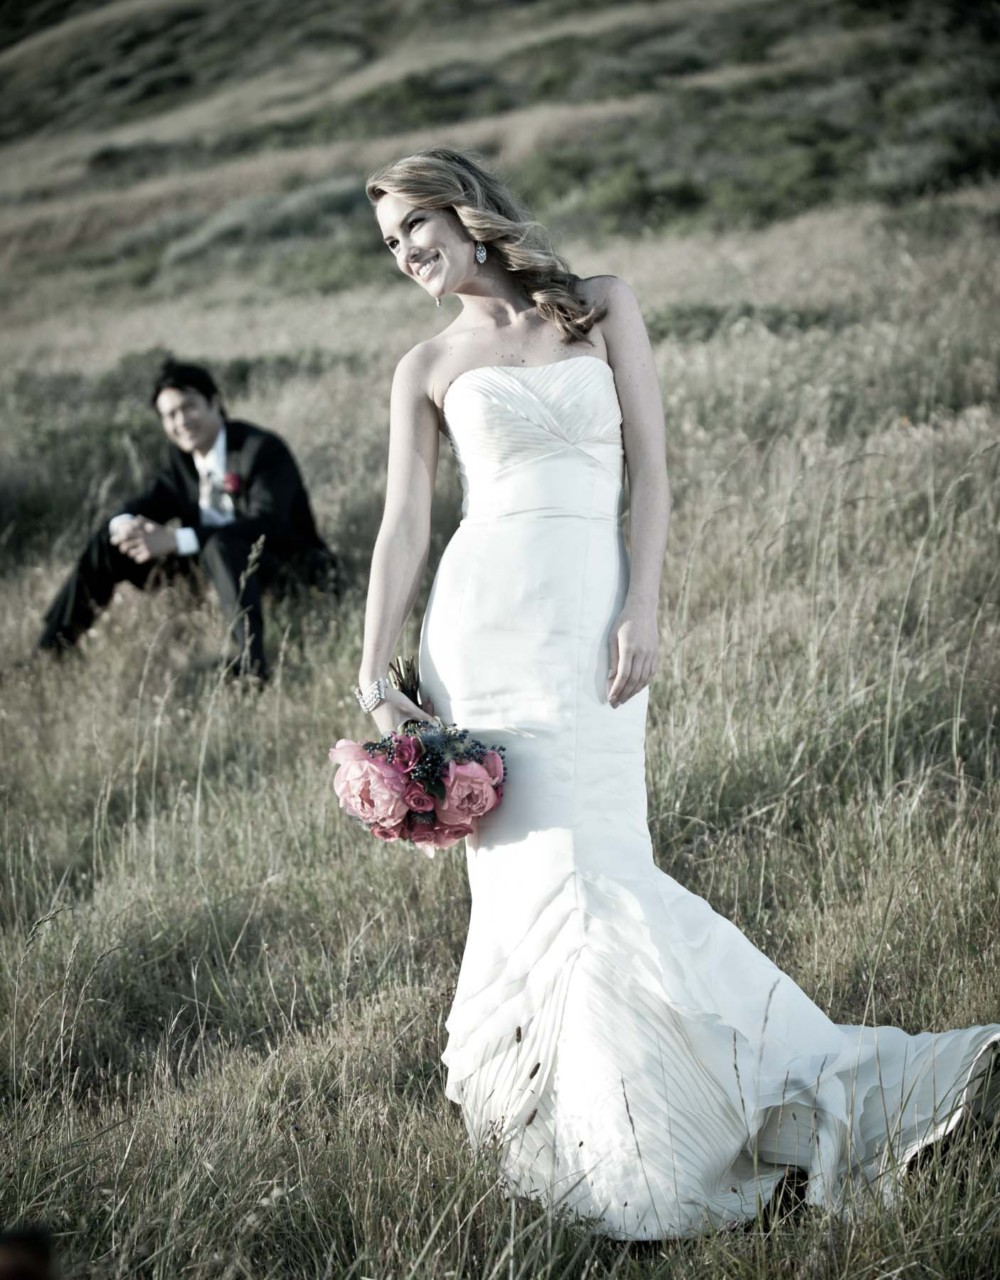 Looking for a creative wedding photographer in Chugiak?